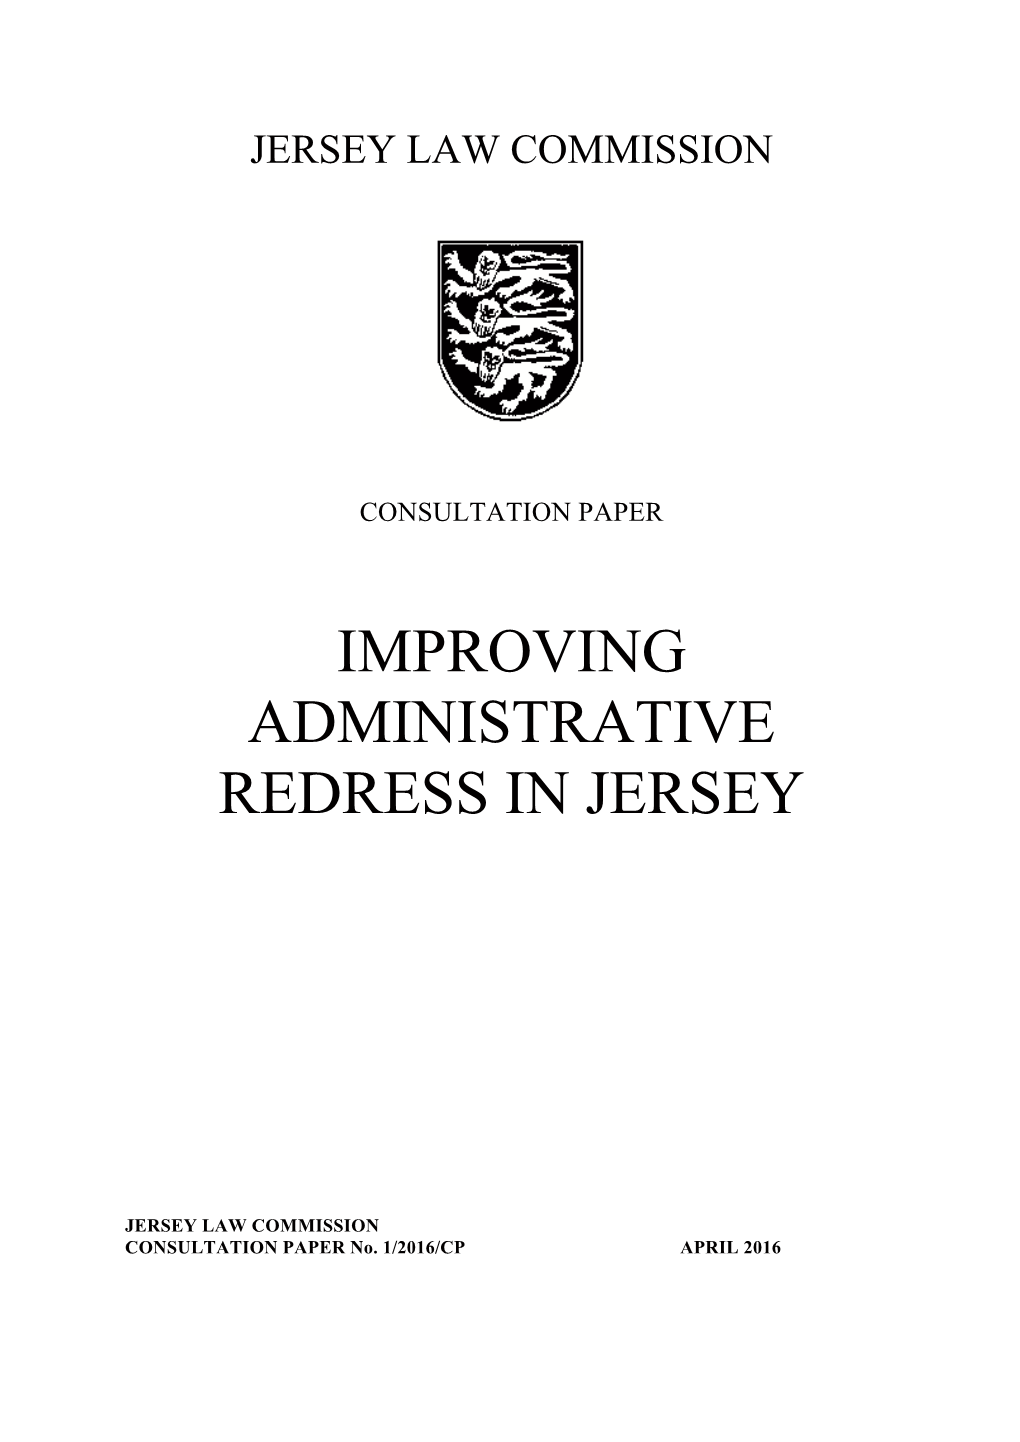 Improving Administrative Redress in Jersey